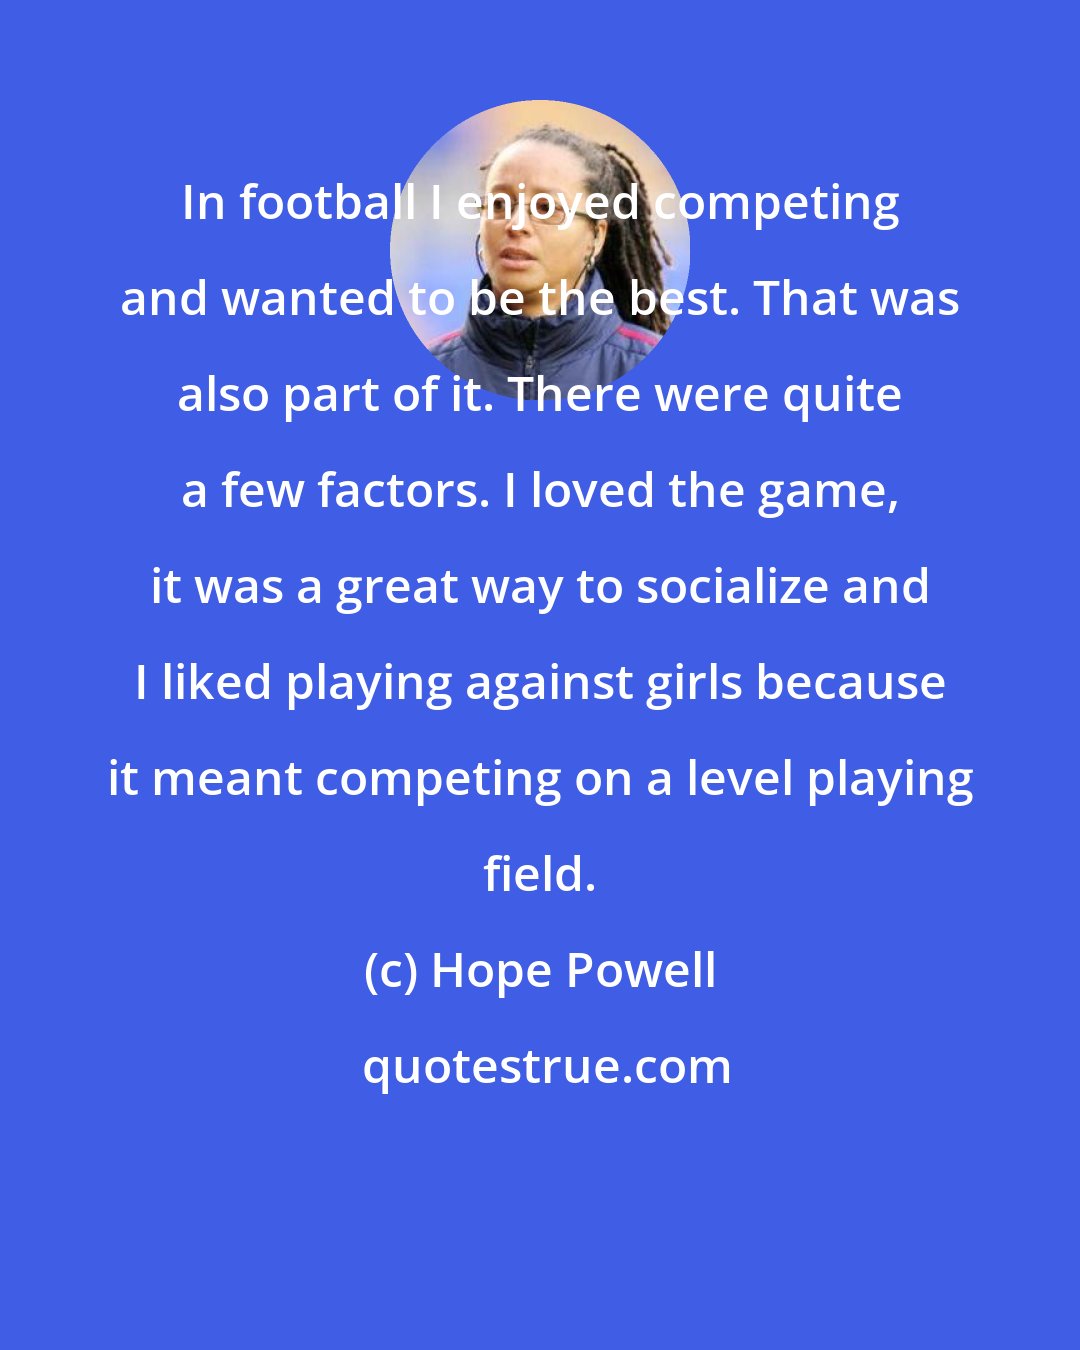 Hope Powell: In football I enjoyed competing and wanted to be the best. That was also part of it. There were quite a few factors. I loved the game, it was a great way to socialize and I liked playing against girls because it meant competing on a level playing field.